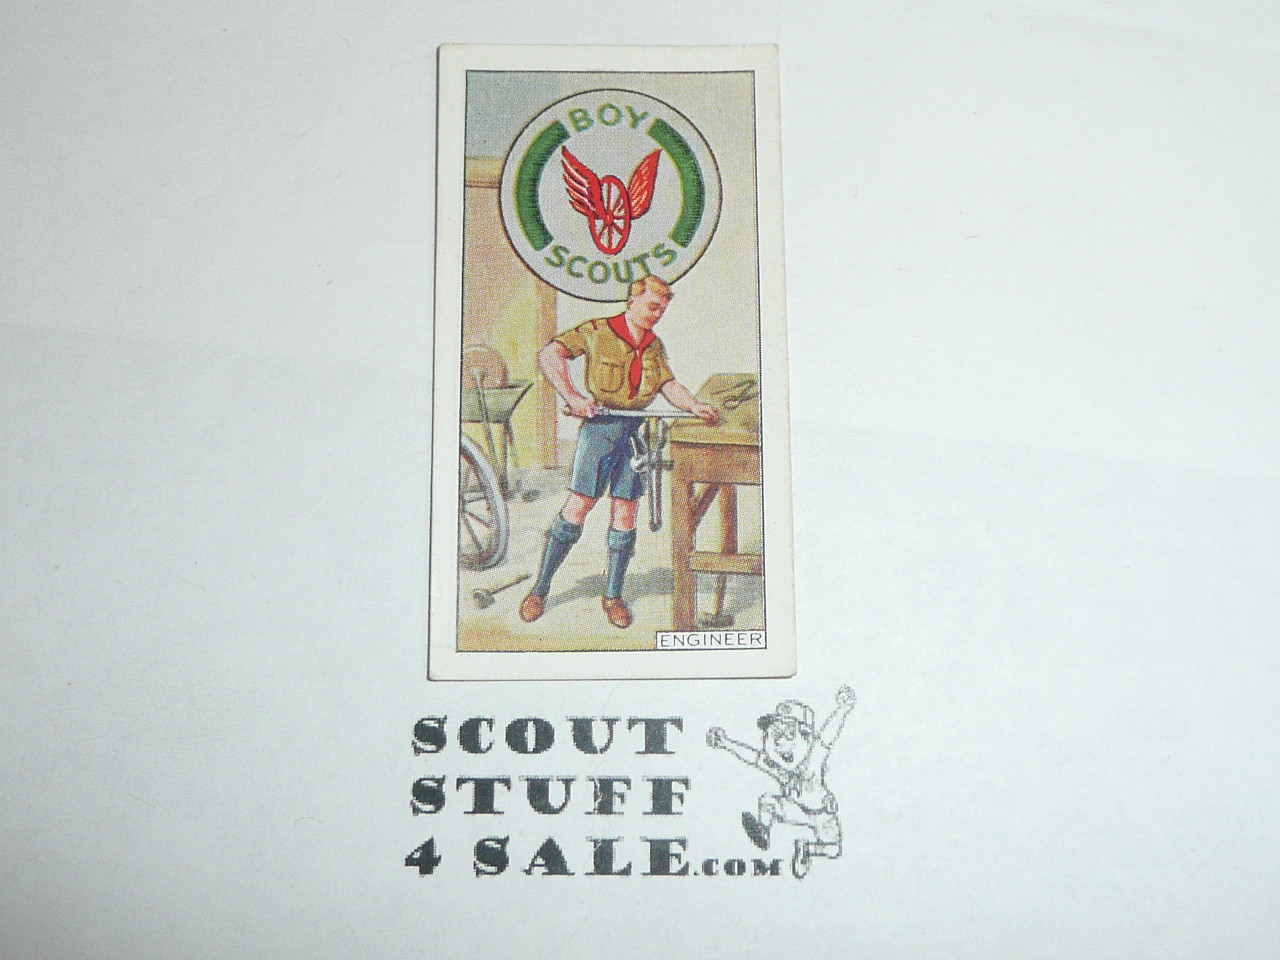 CWS Cigarette Company Premium Card, Boy Scout Badges Series of 50, Card #35 Engineer, 1939